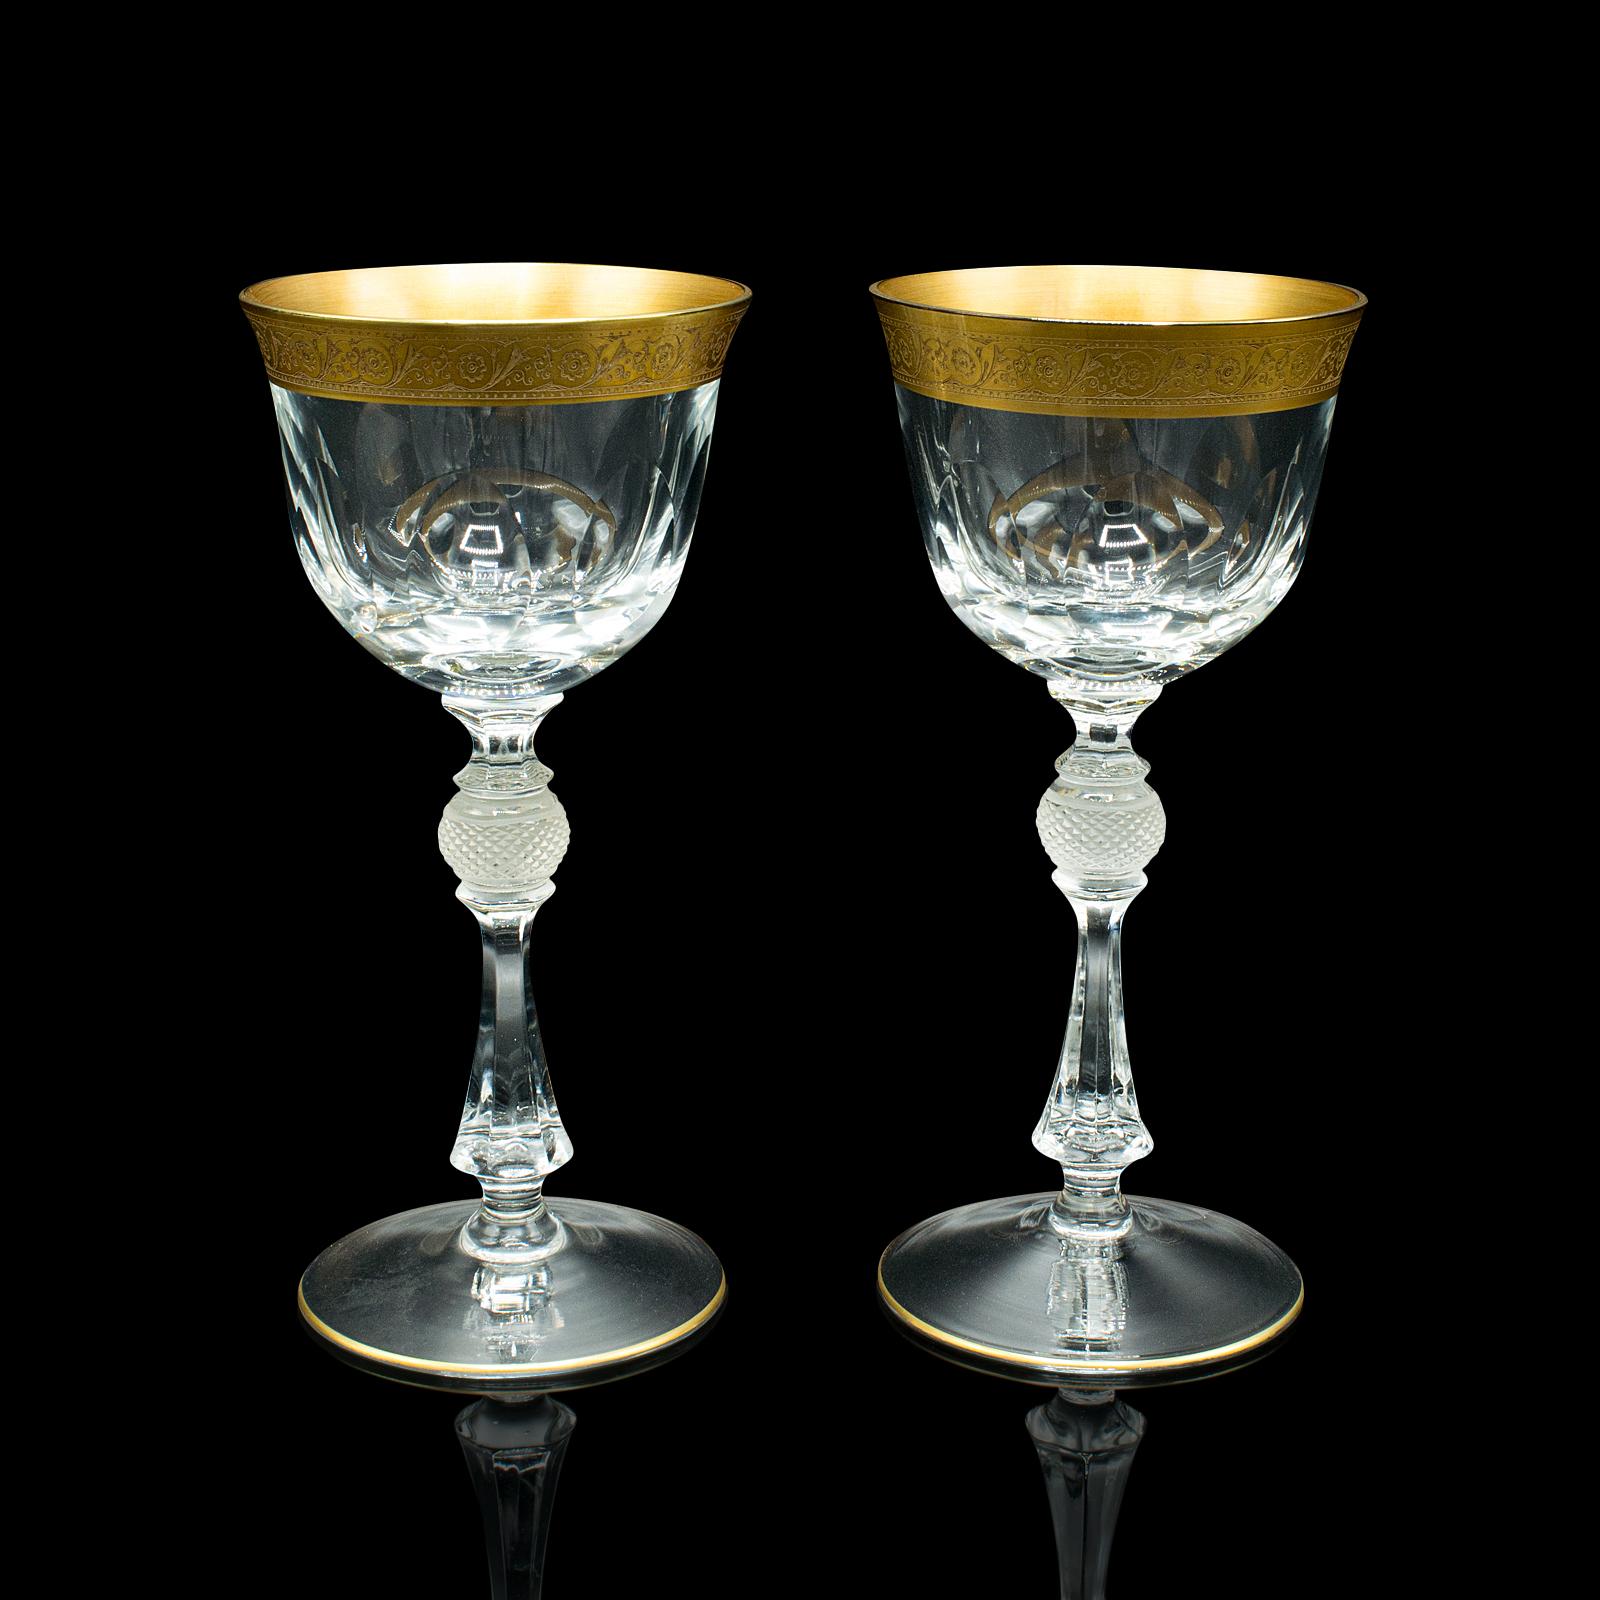 This is a pair of antique celebratory port glasses. A French, gilt decorated stem glass, dating to the Art Deco period, circa 1920.

Dashing port glasses, ideal for special occasions
Displaying a desirable aged patina and in good order
Quality